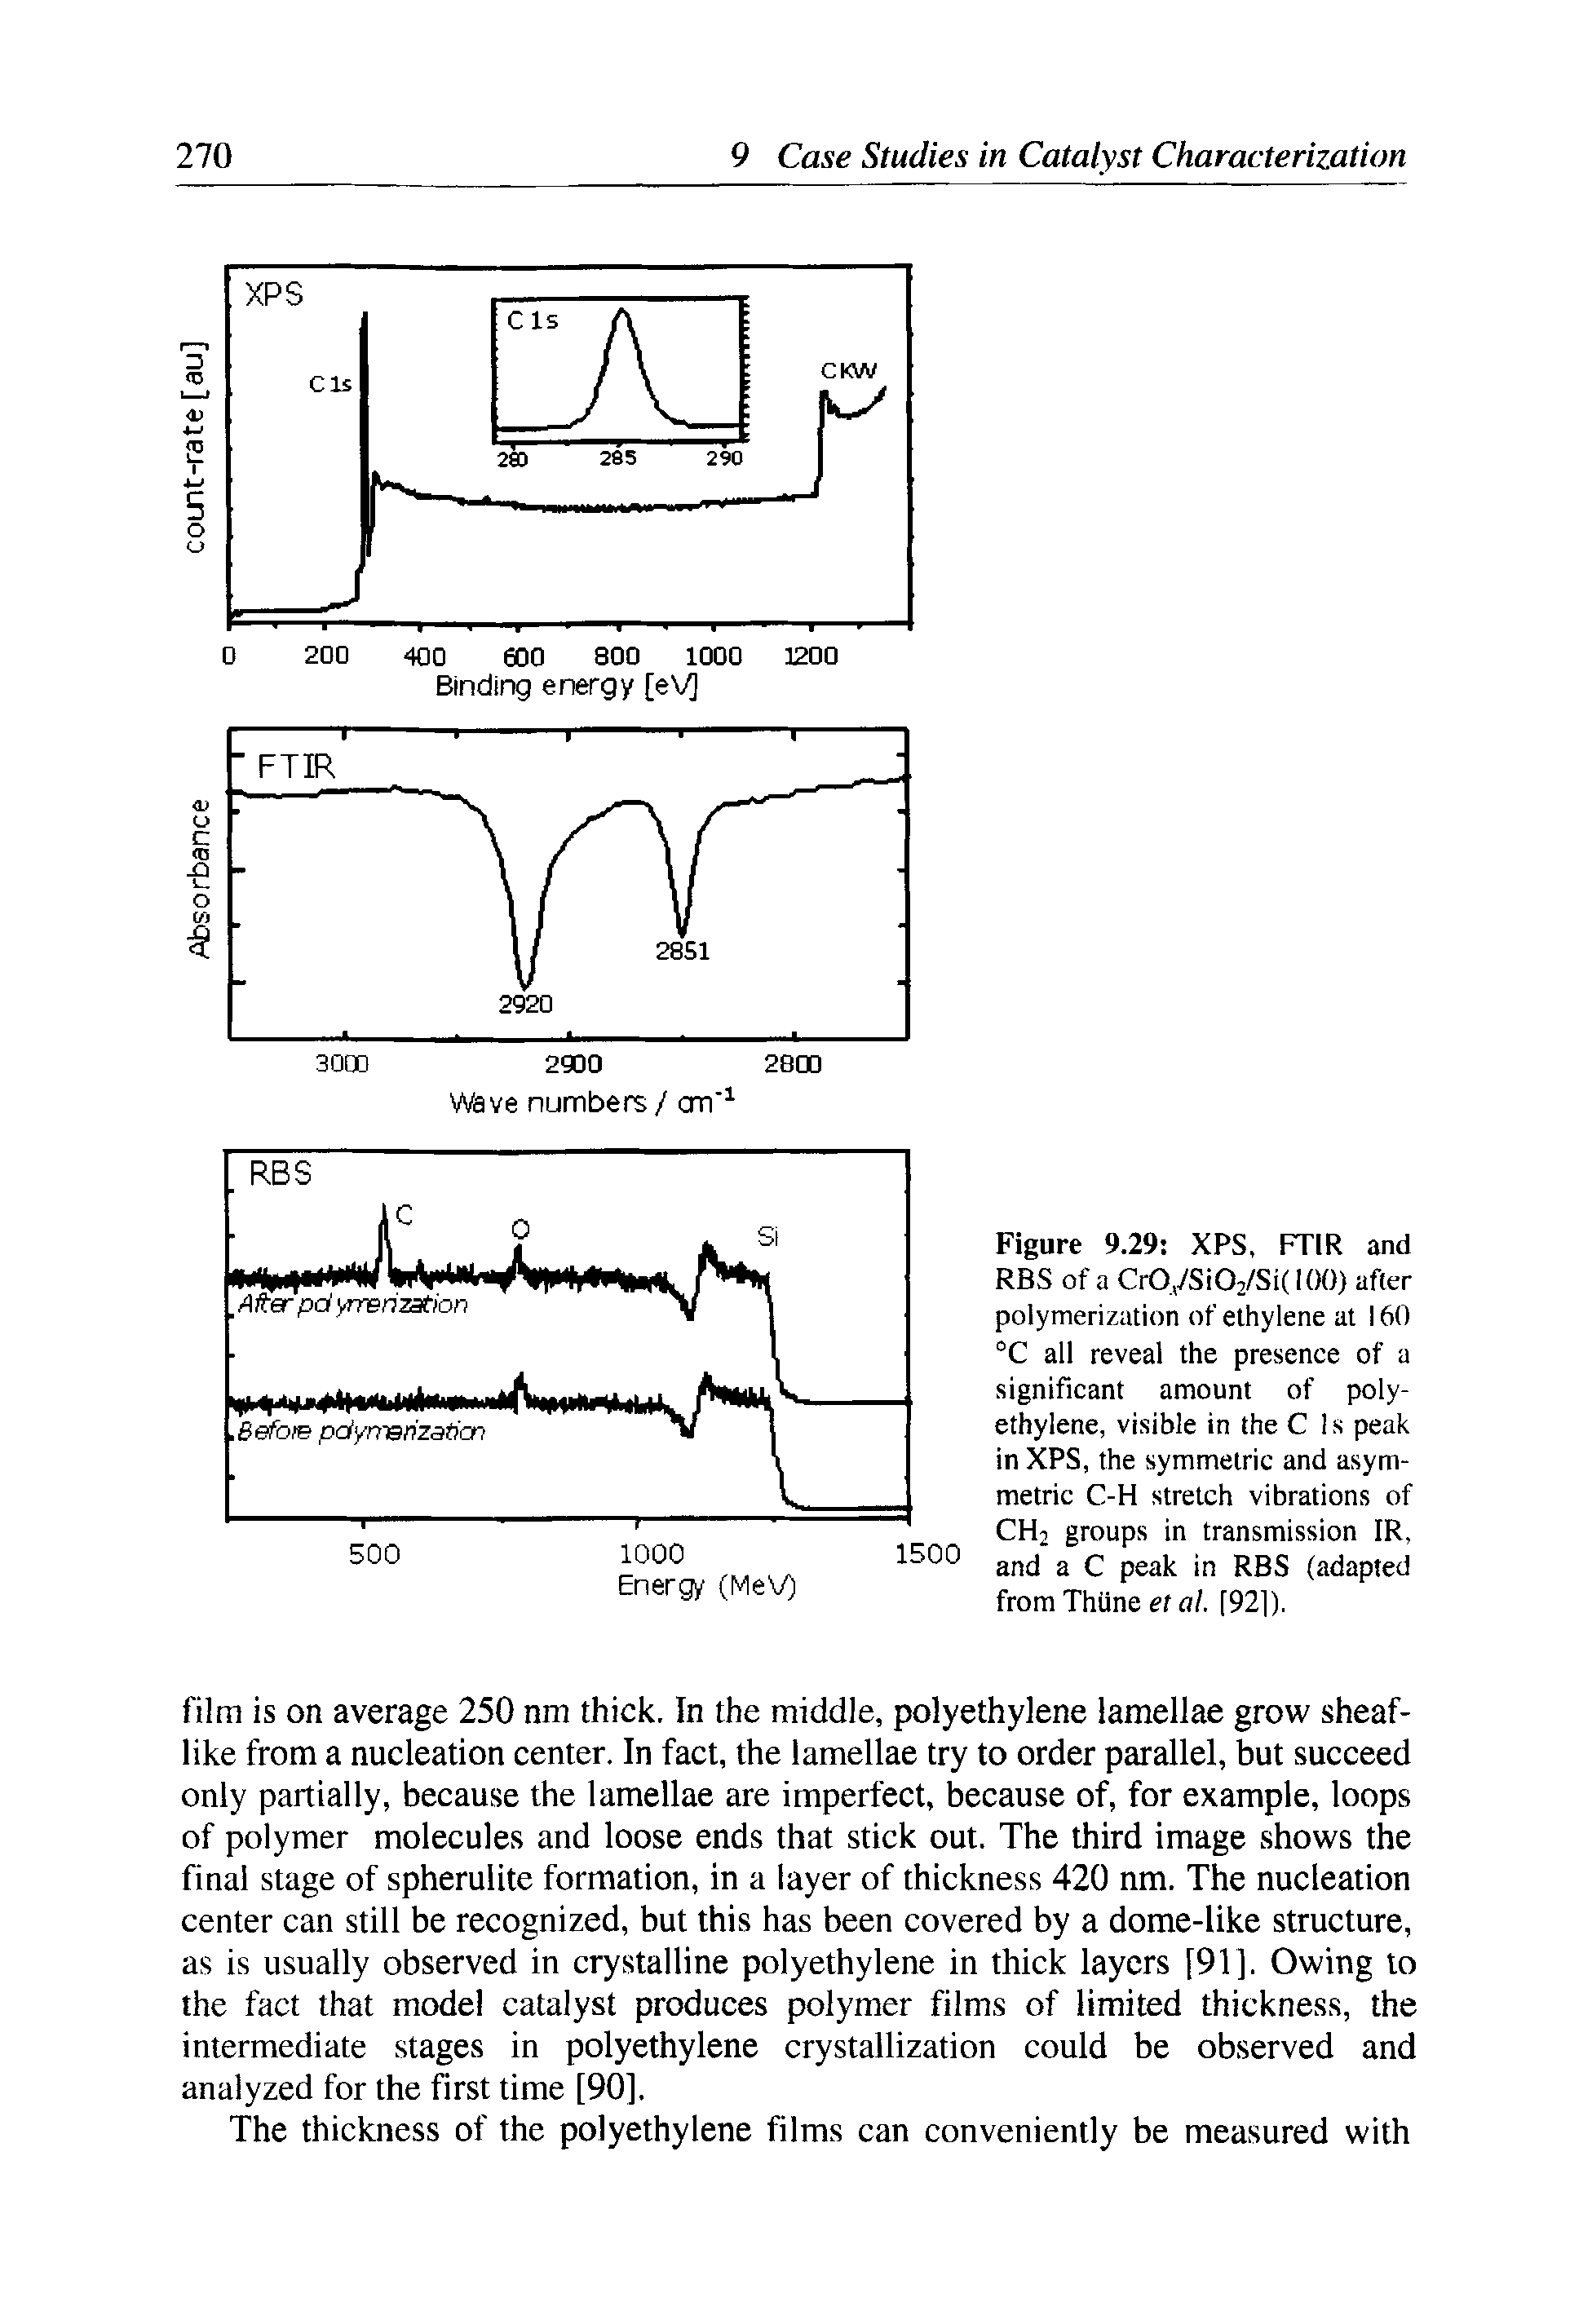 Figure 9.29 XPS, FTIR and RBS of a CrO,ySi02/Si( 100) after polymerization of ethylene at 160 °C all reveal the presence of a significant amount of polyethylene, visible in the C Is peak in XPS, the symmetric and asymmetric C-H stretch vibrations of CH2 groups in transmission IR, and a C peak in RBS (adapted fromThiine etal. [92]).